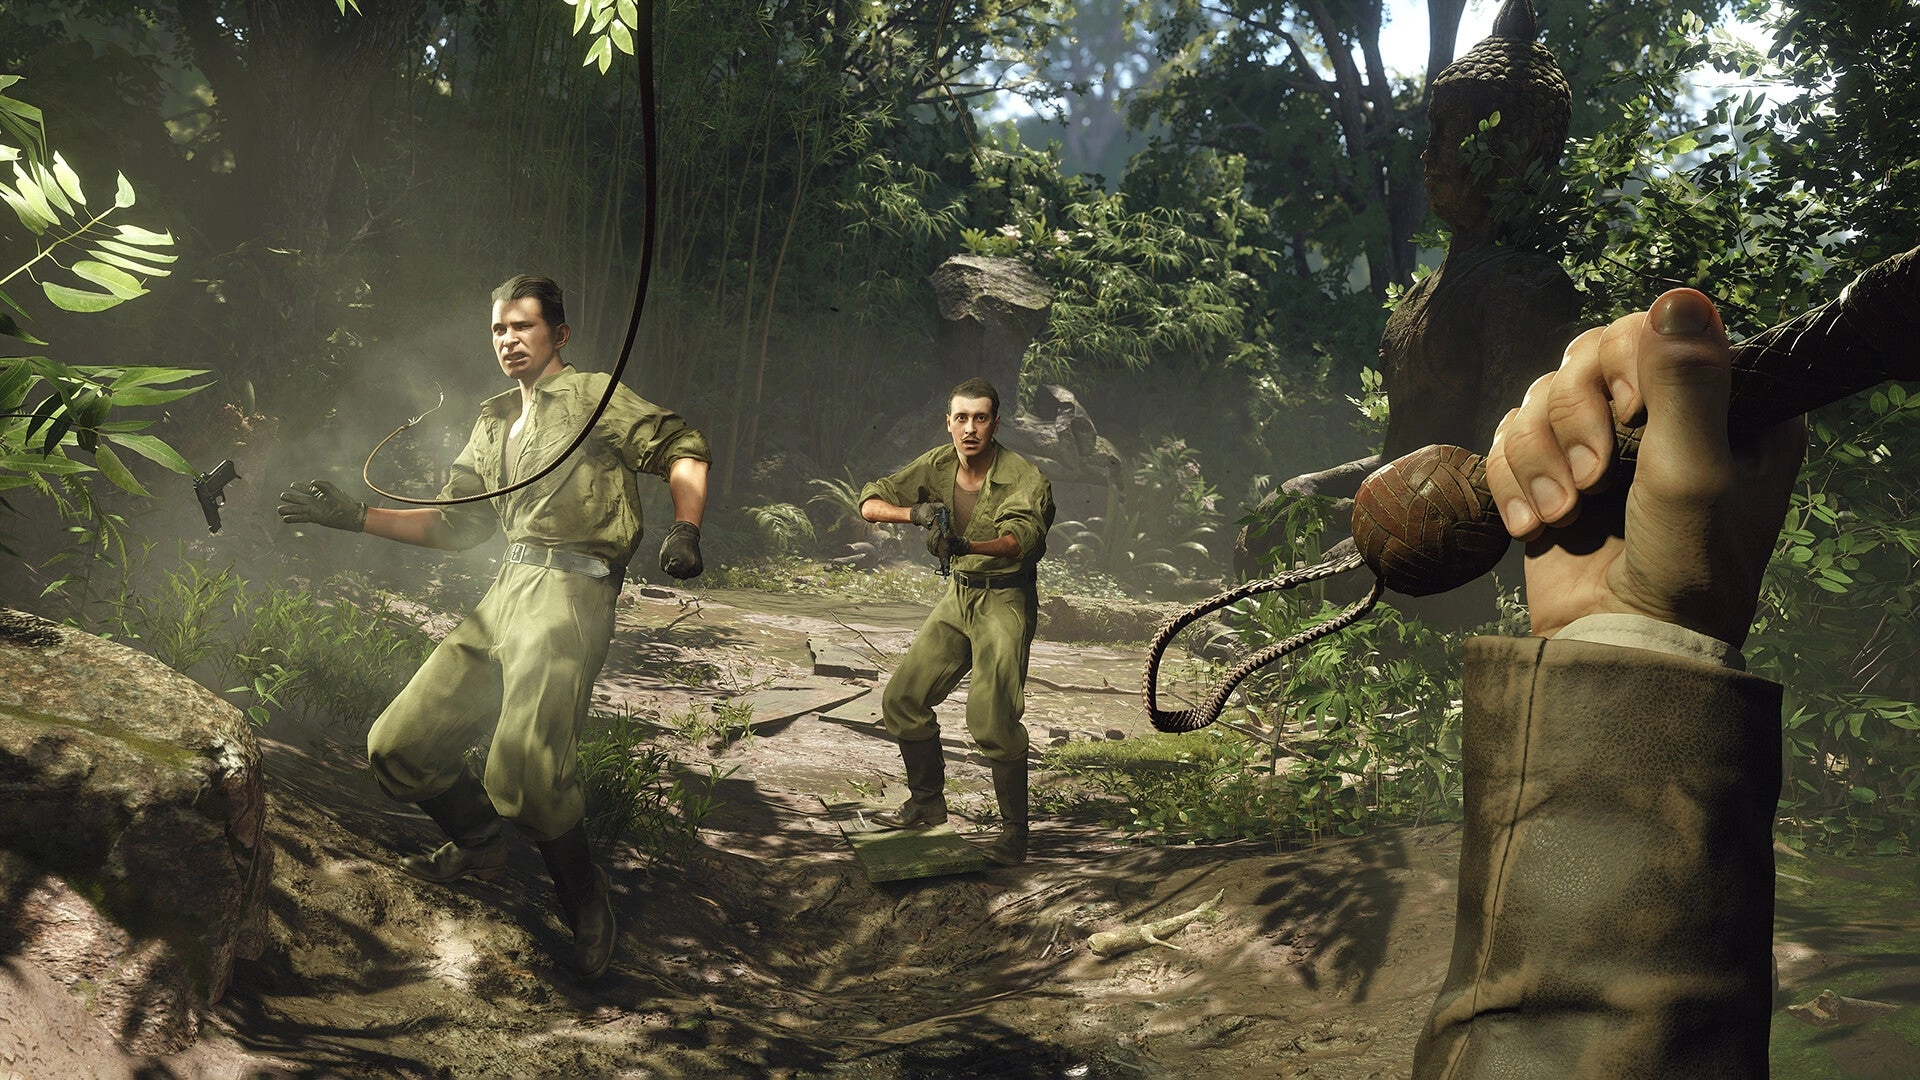 Indiana Jones Game Innovates with First-Person Action